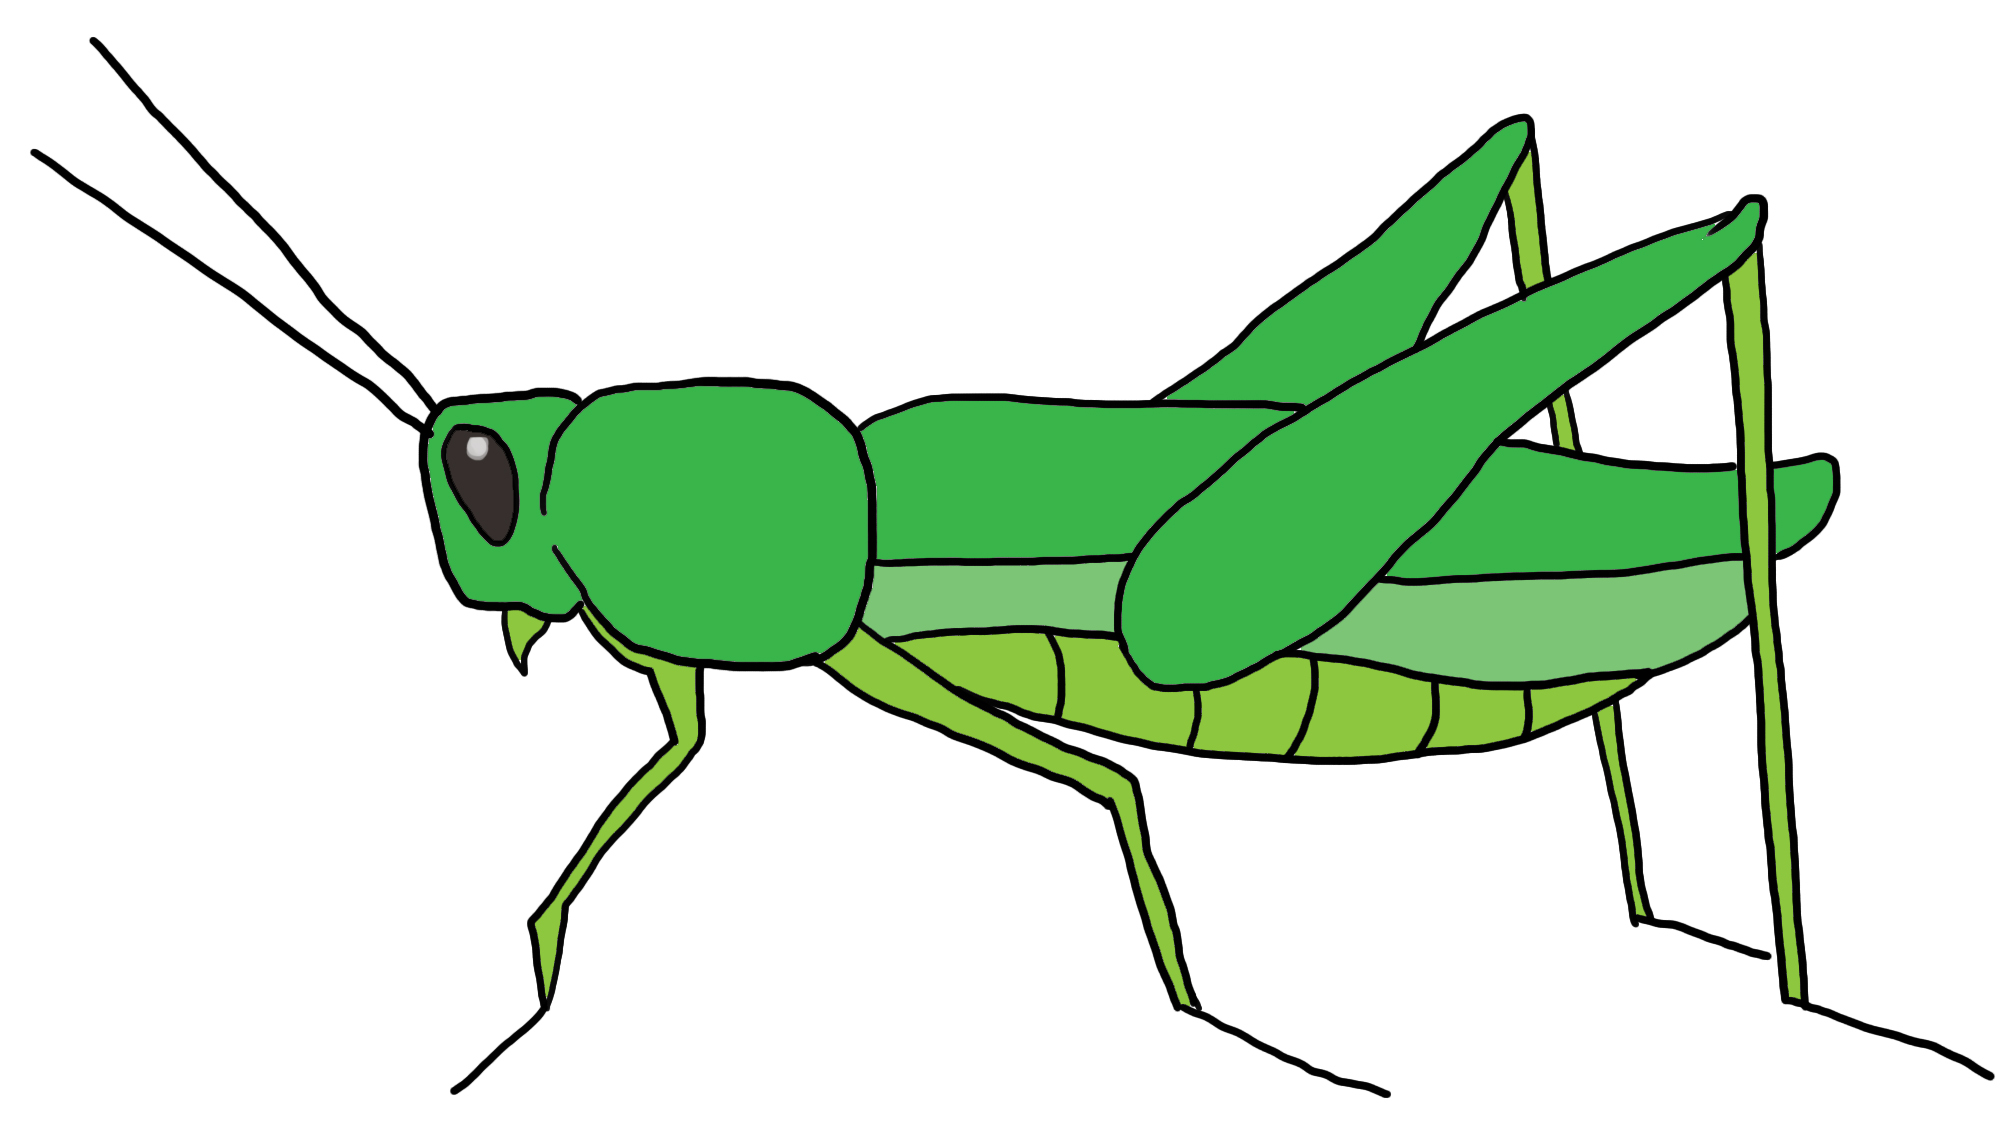 Common Green Grasshopper | Clipart Panda - Free Clipart Images